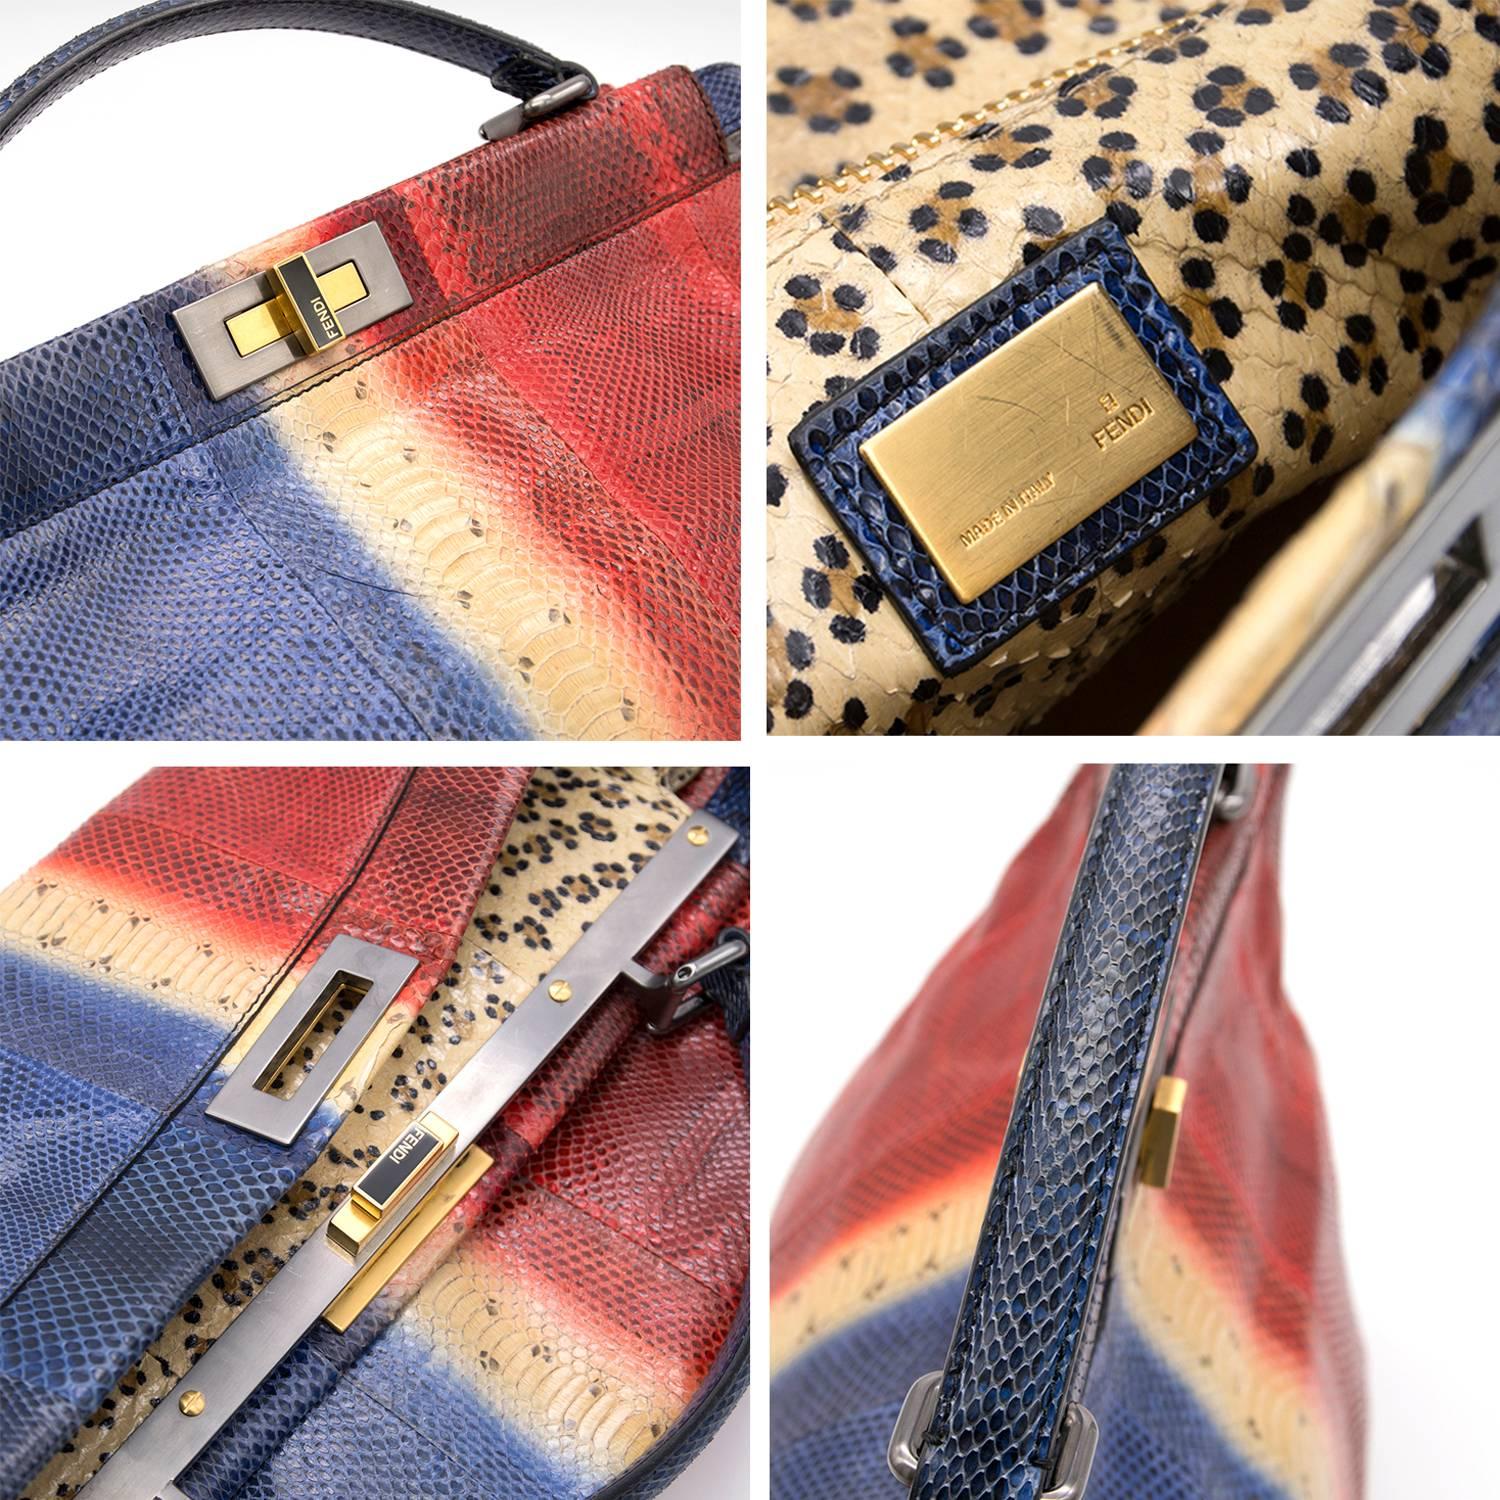 Fendi Multicolor Python Leather Large Peekaboo Tote Bag In Good Condition For Sale In London, GB